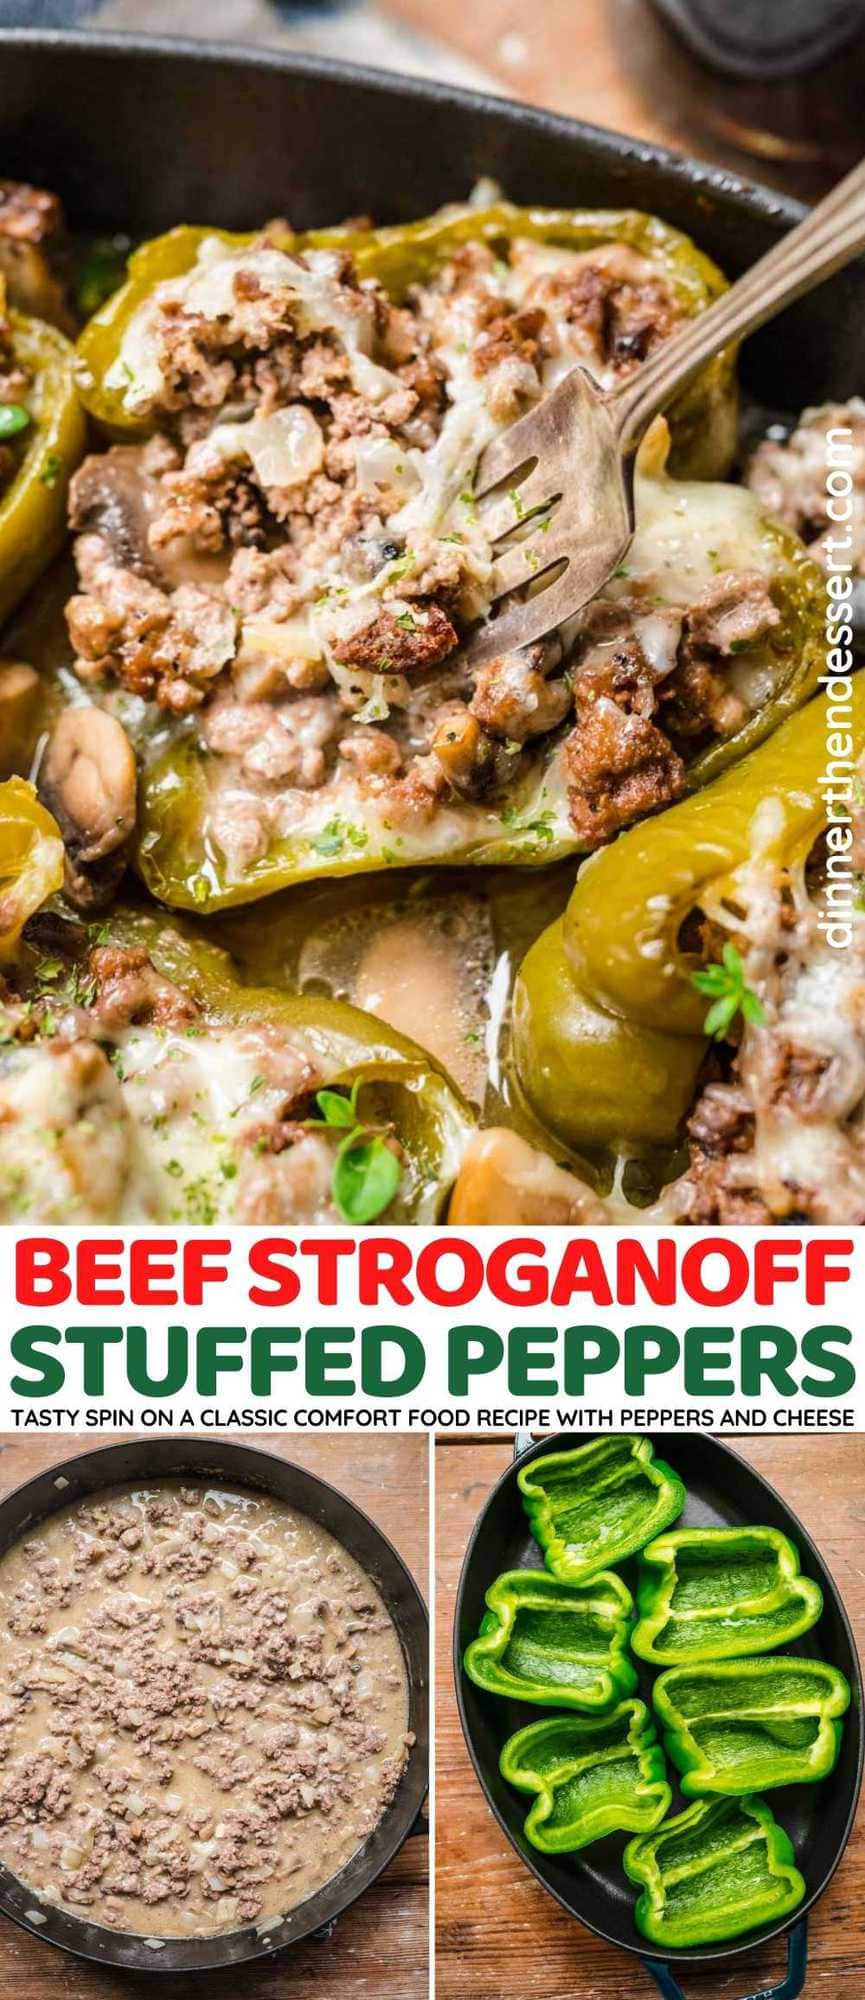 Beef Stroganoff Stuffed Peppers collage